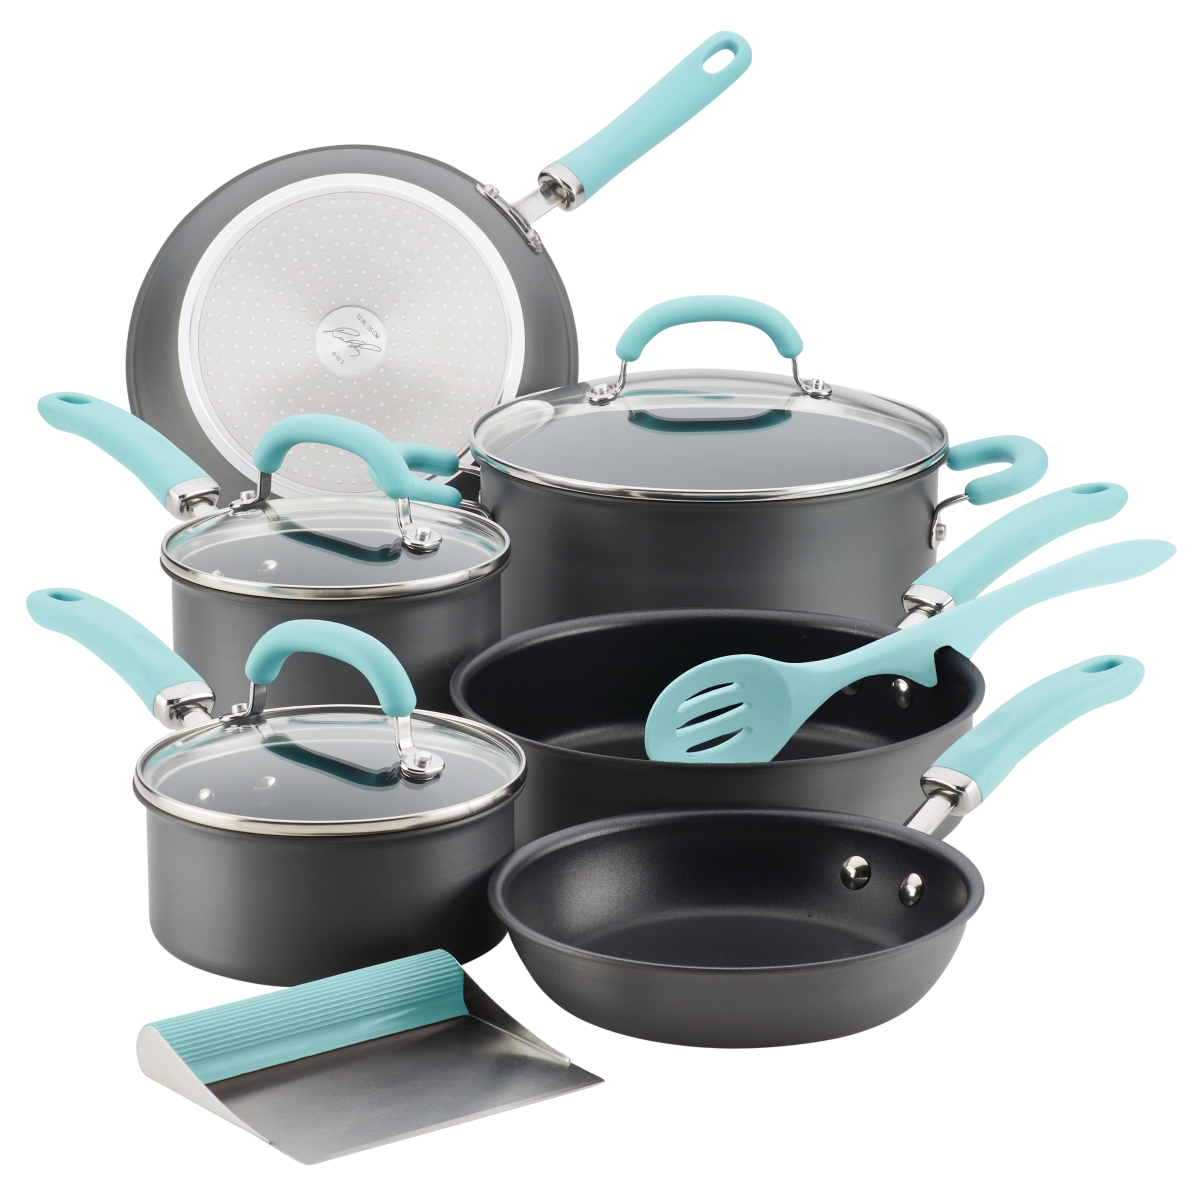 Picture of Rachael Ray 81125 Create Delicious Hard-Anodized Aluminum Nonstick Cookware Set, 11 Piece - Light Blue Handles